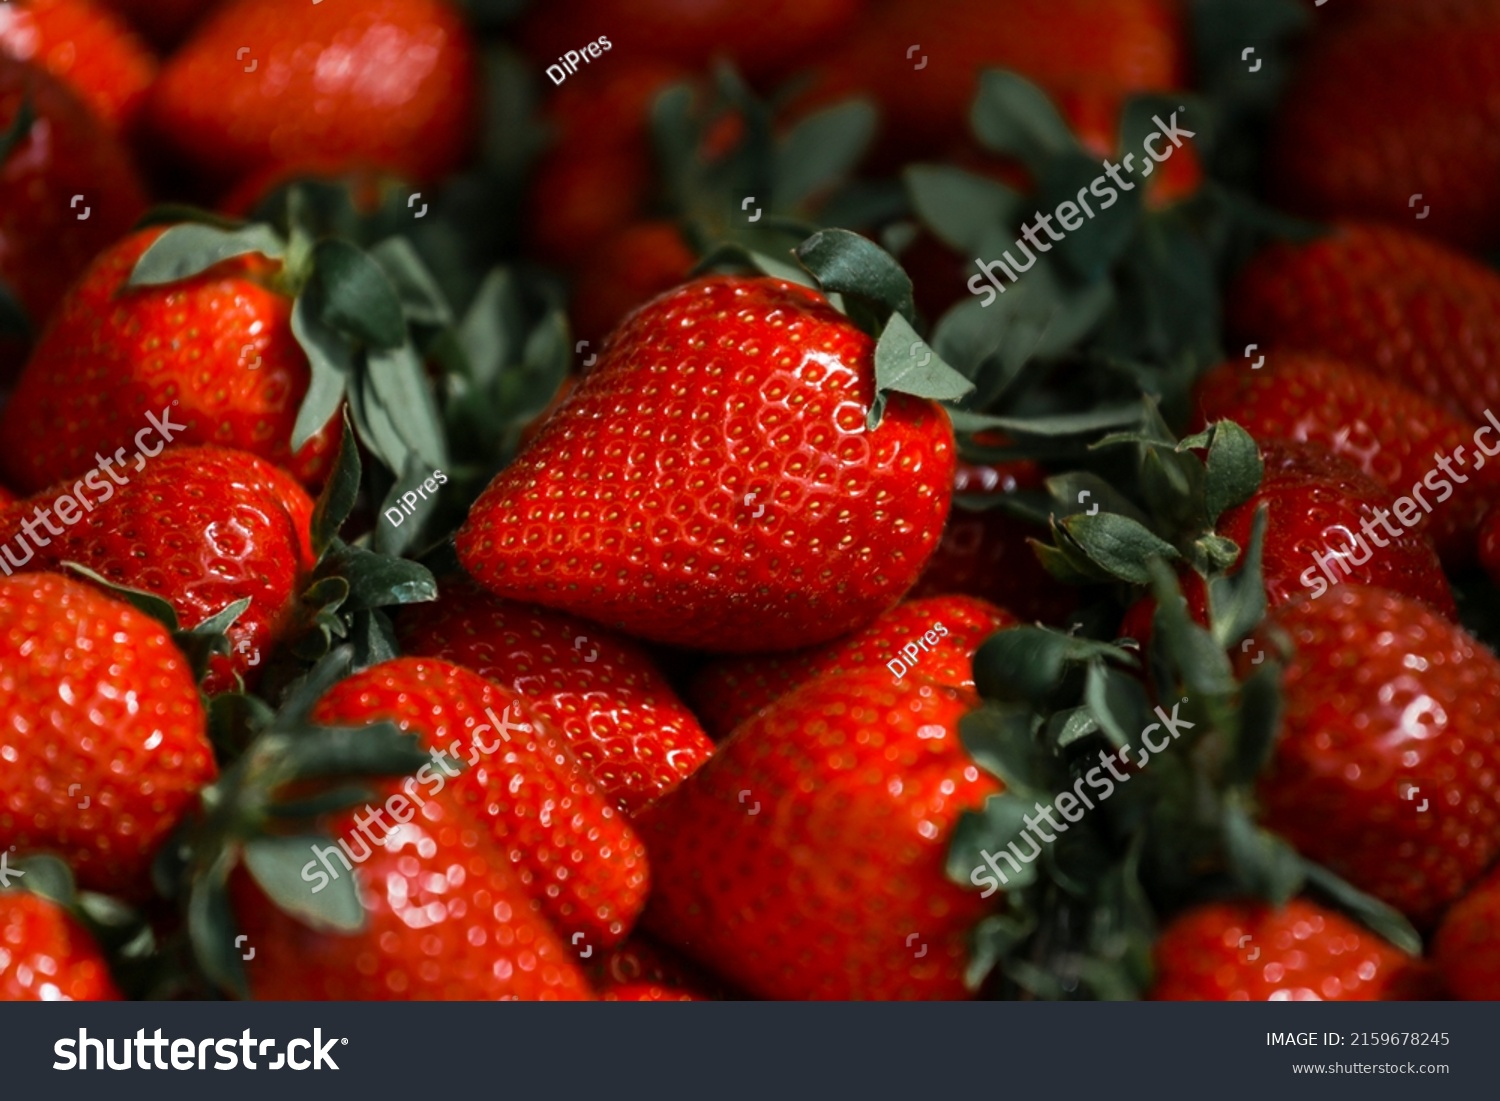 Close-up of a selective focus of ripe strawberries on the counter. Strawberries are sold in boxes as a healthy food. Top view of delicious, fresh, juicy strawberries, just picked. Juicy berries. #2159678245